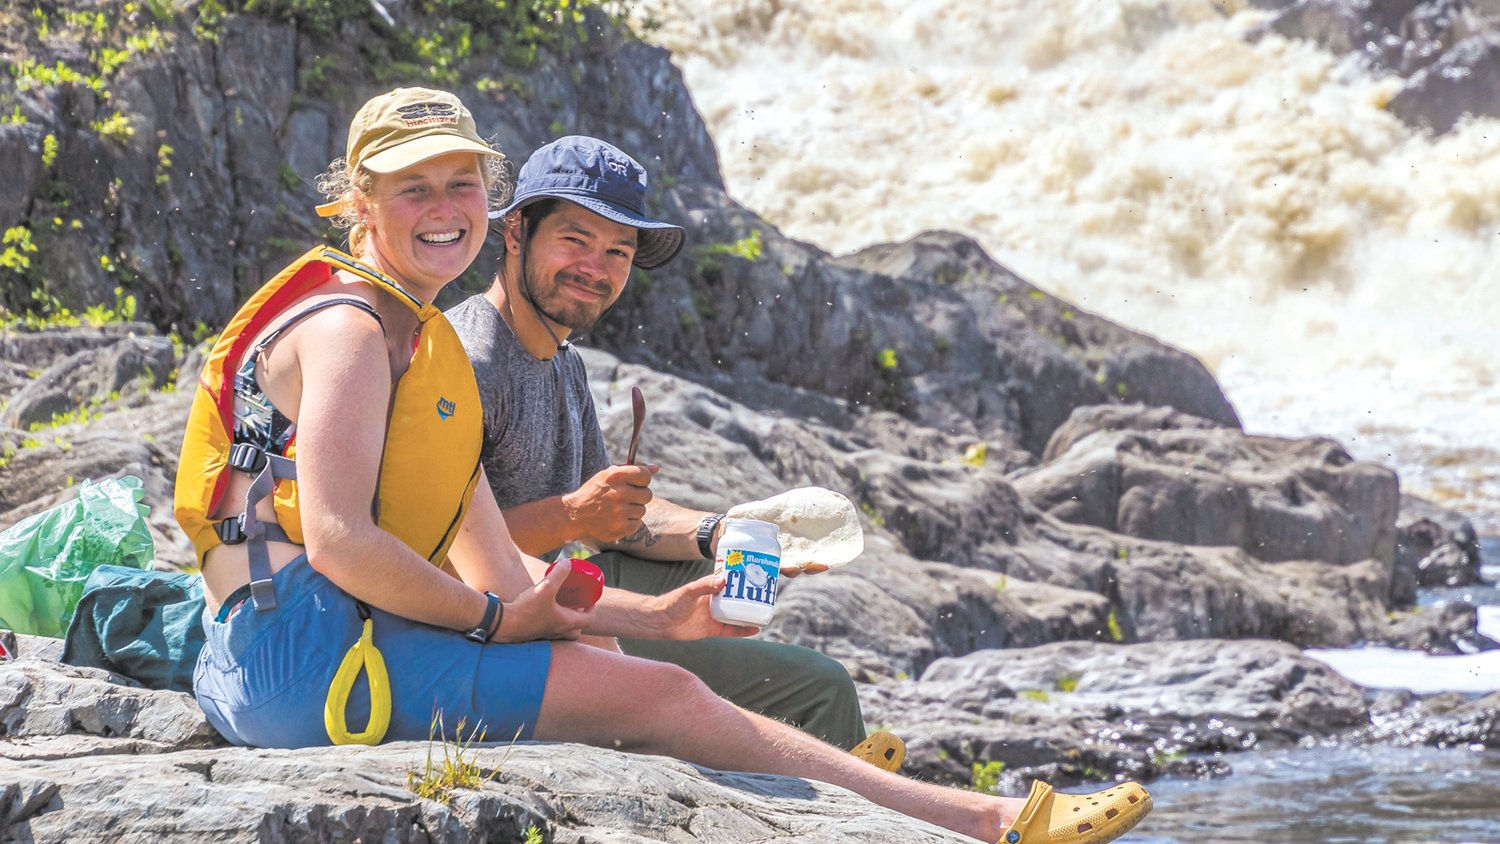 TIME FOR A SNACK: Phoebe and Ben take a break from paddling.